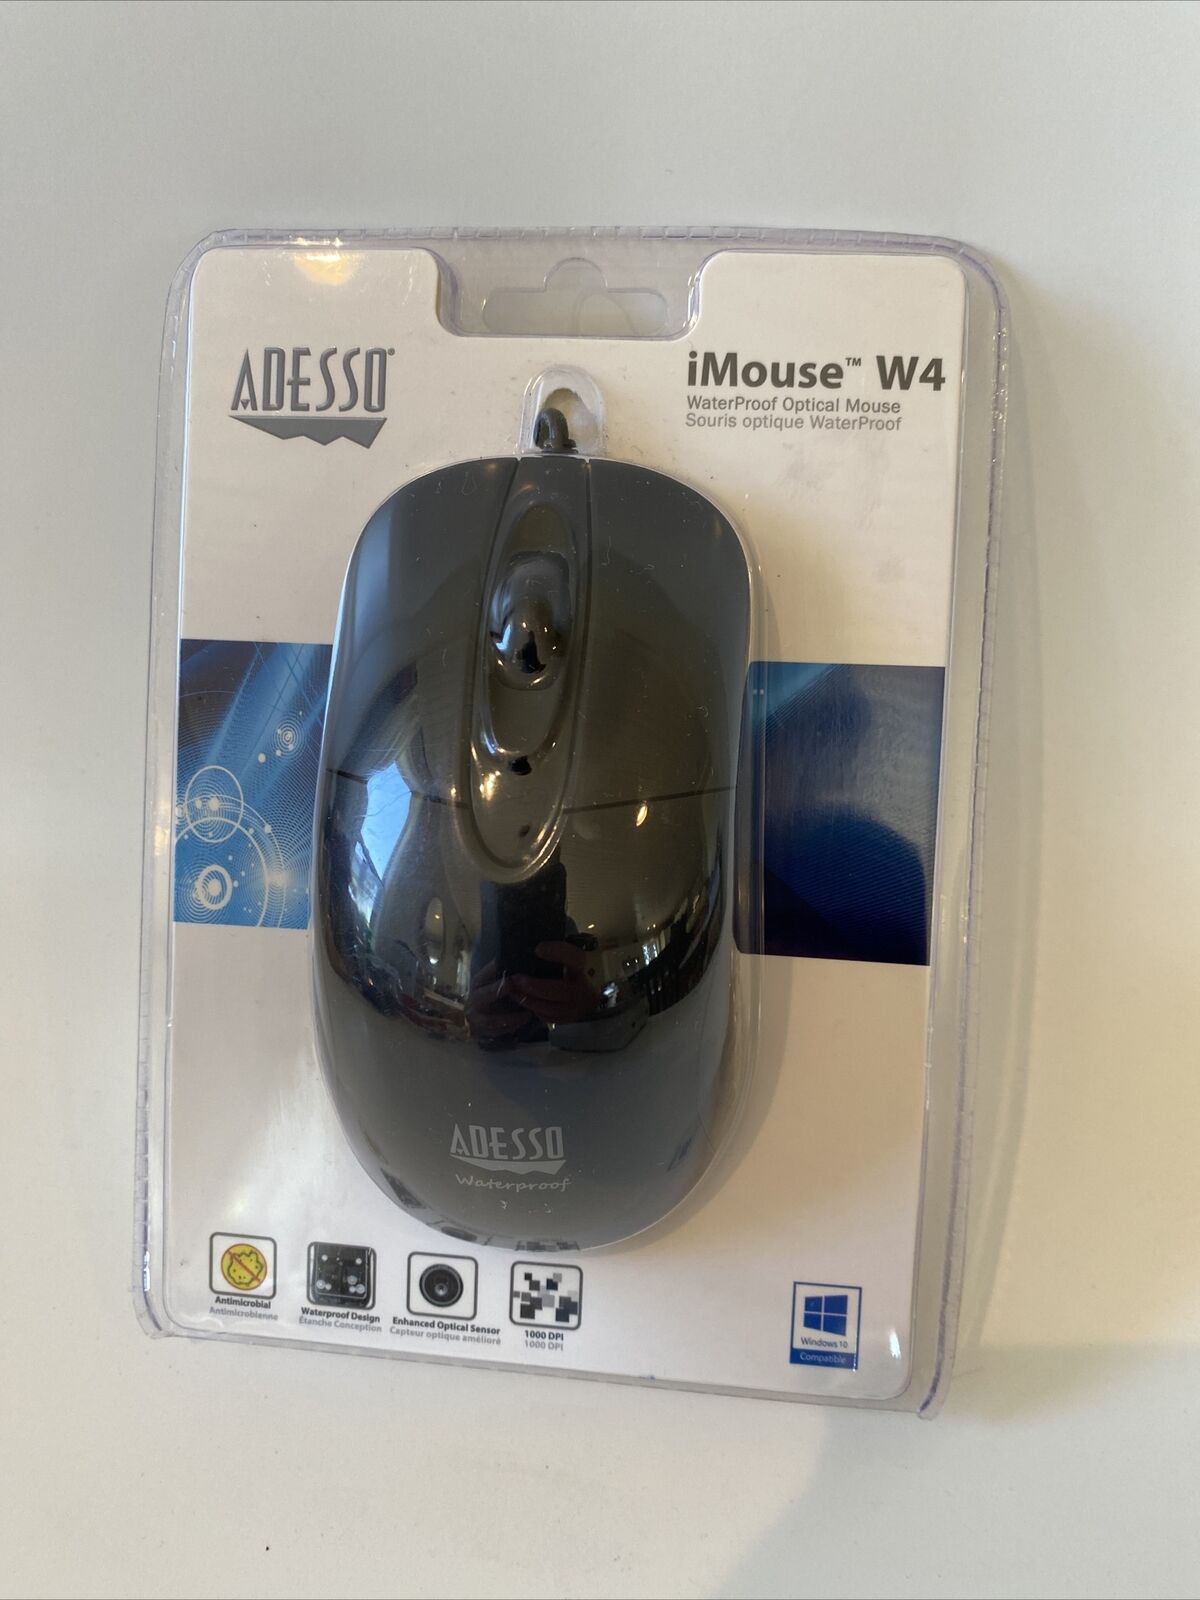 Adesso iMouse W4 Waterproof Optical Mouse